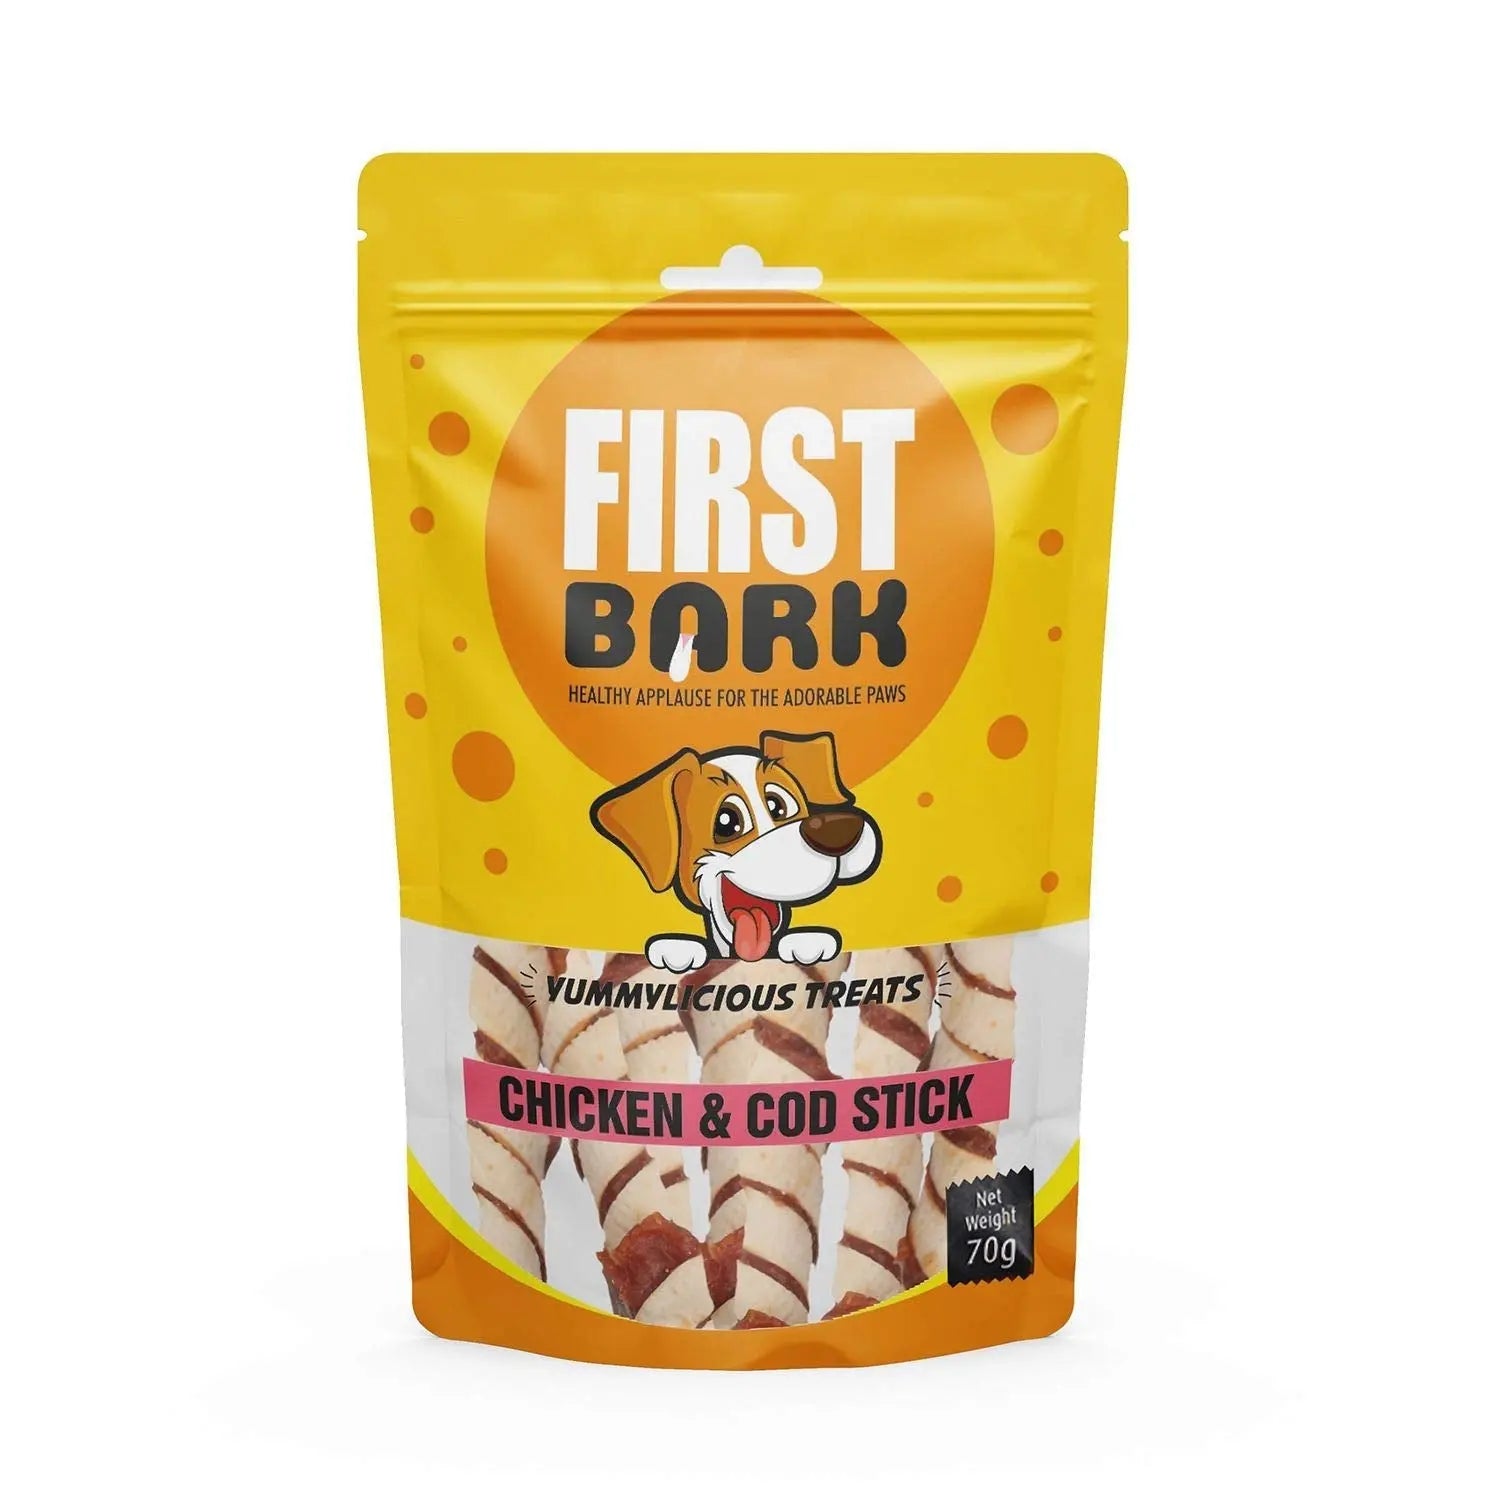 First Bark Yummylicious Jerky Dog Treats, Chicken & Cod Stick,70 g (Pack of 2) with Free Jerhigh Stick Made with Real Chicken Meat 40g Sold by DogsNCats First Bark